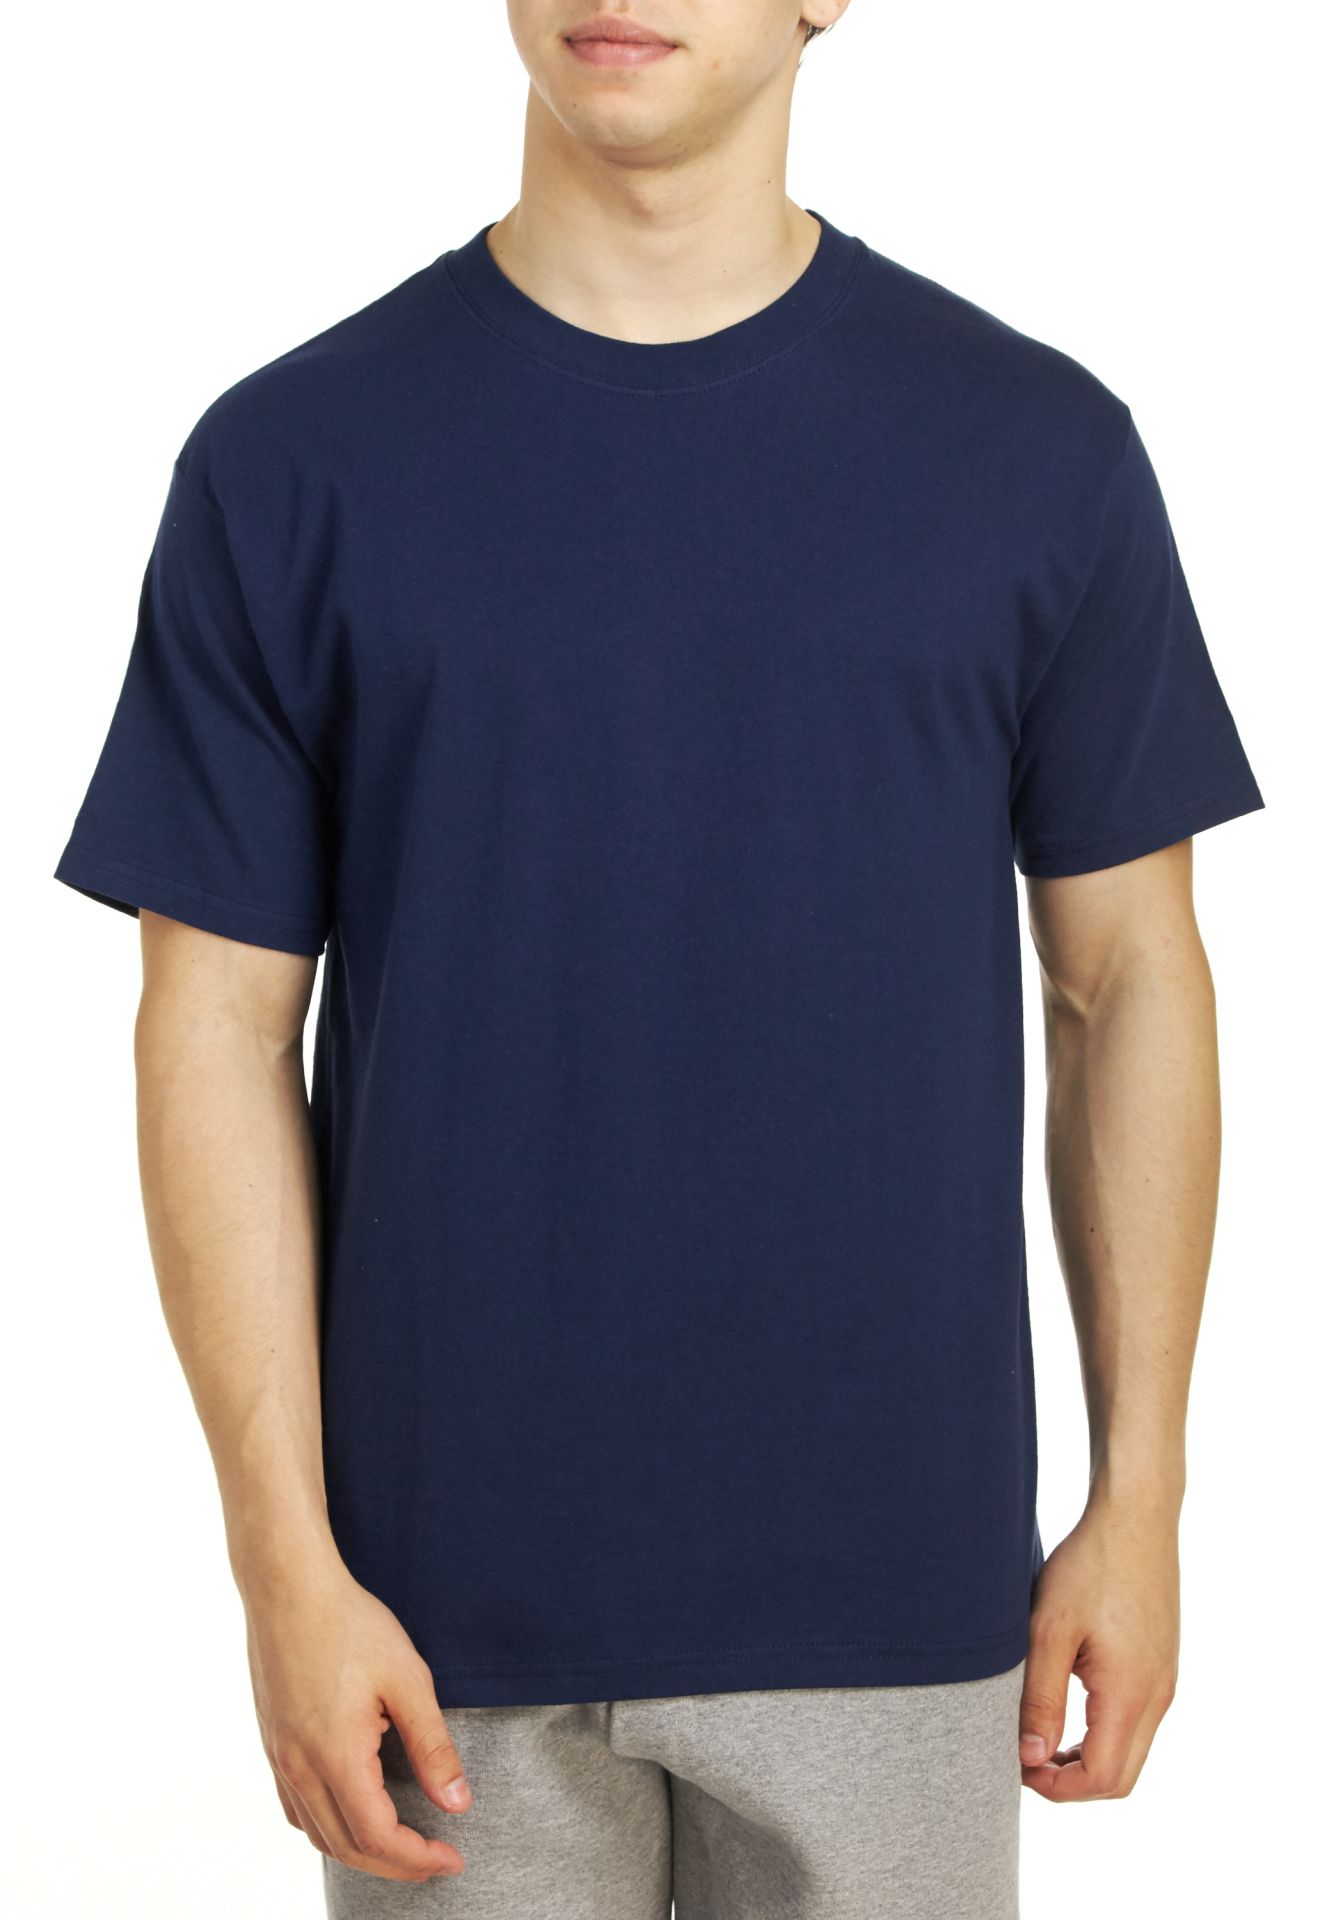 Hanes Men's Short Sleeve Beefy-t Navy Size Small O2fh for sale online ...